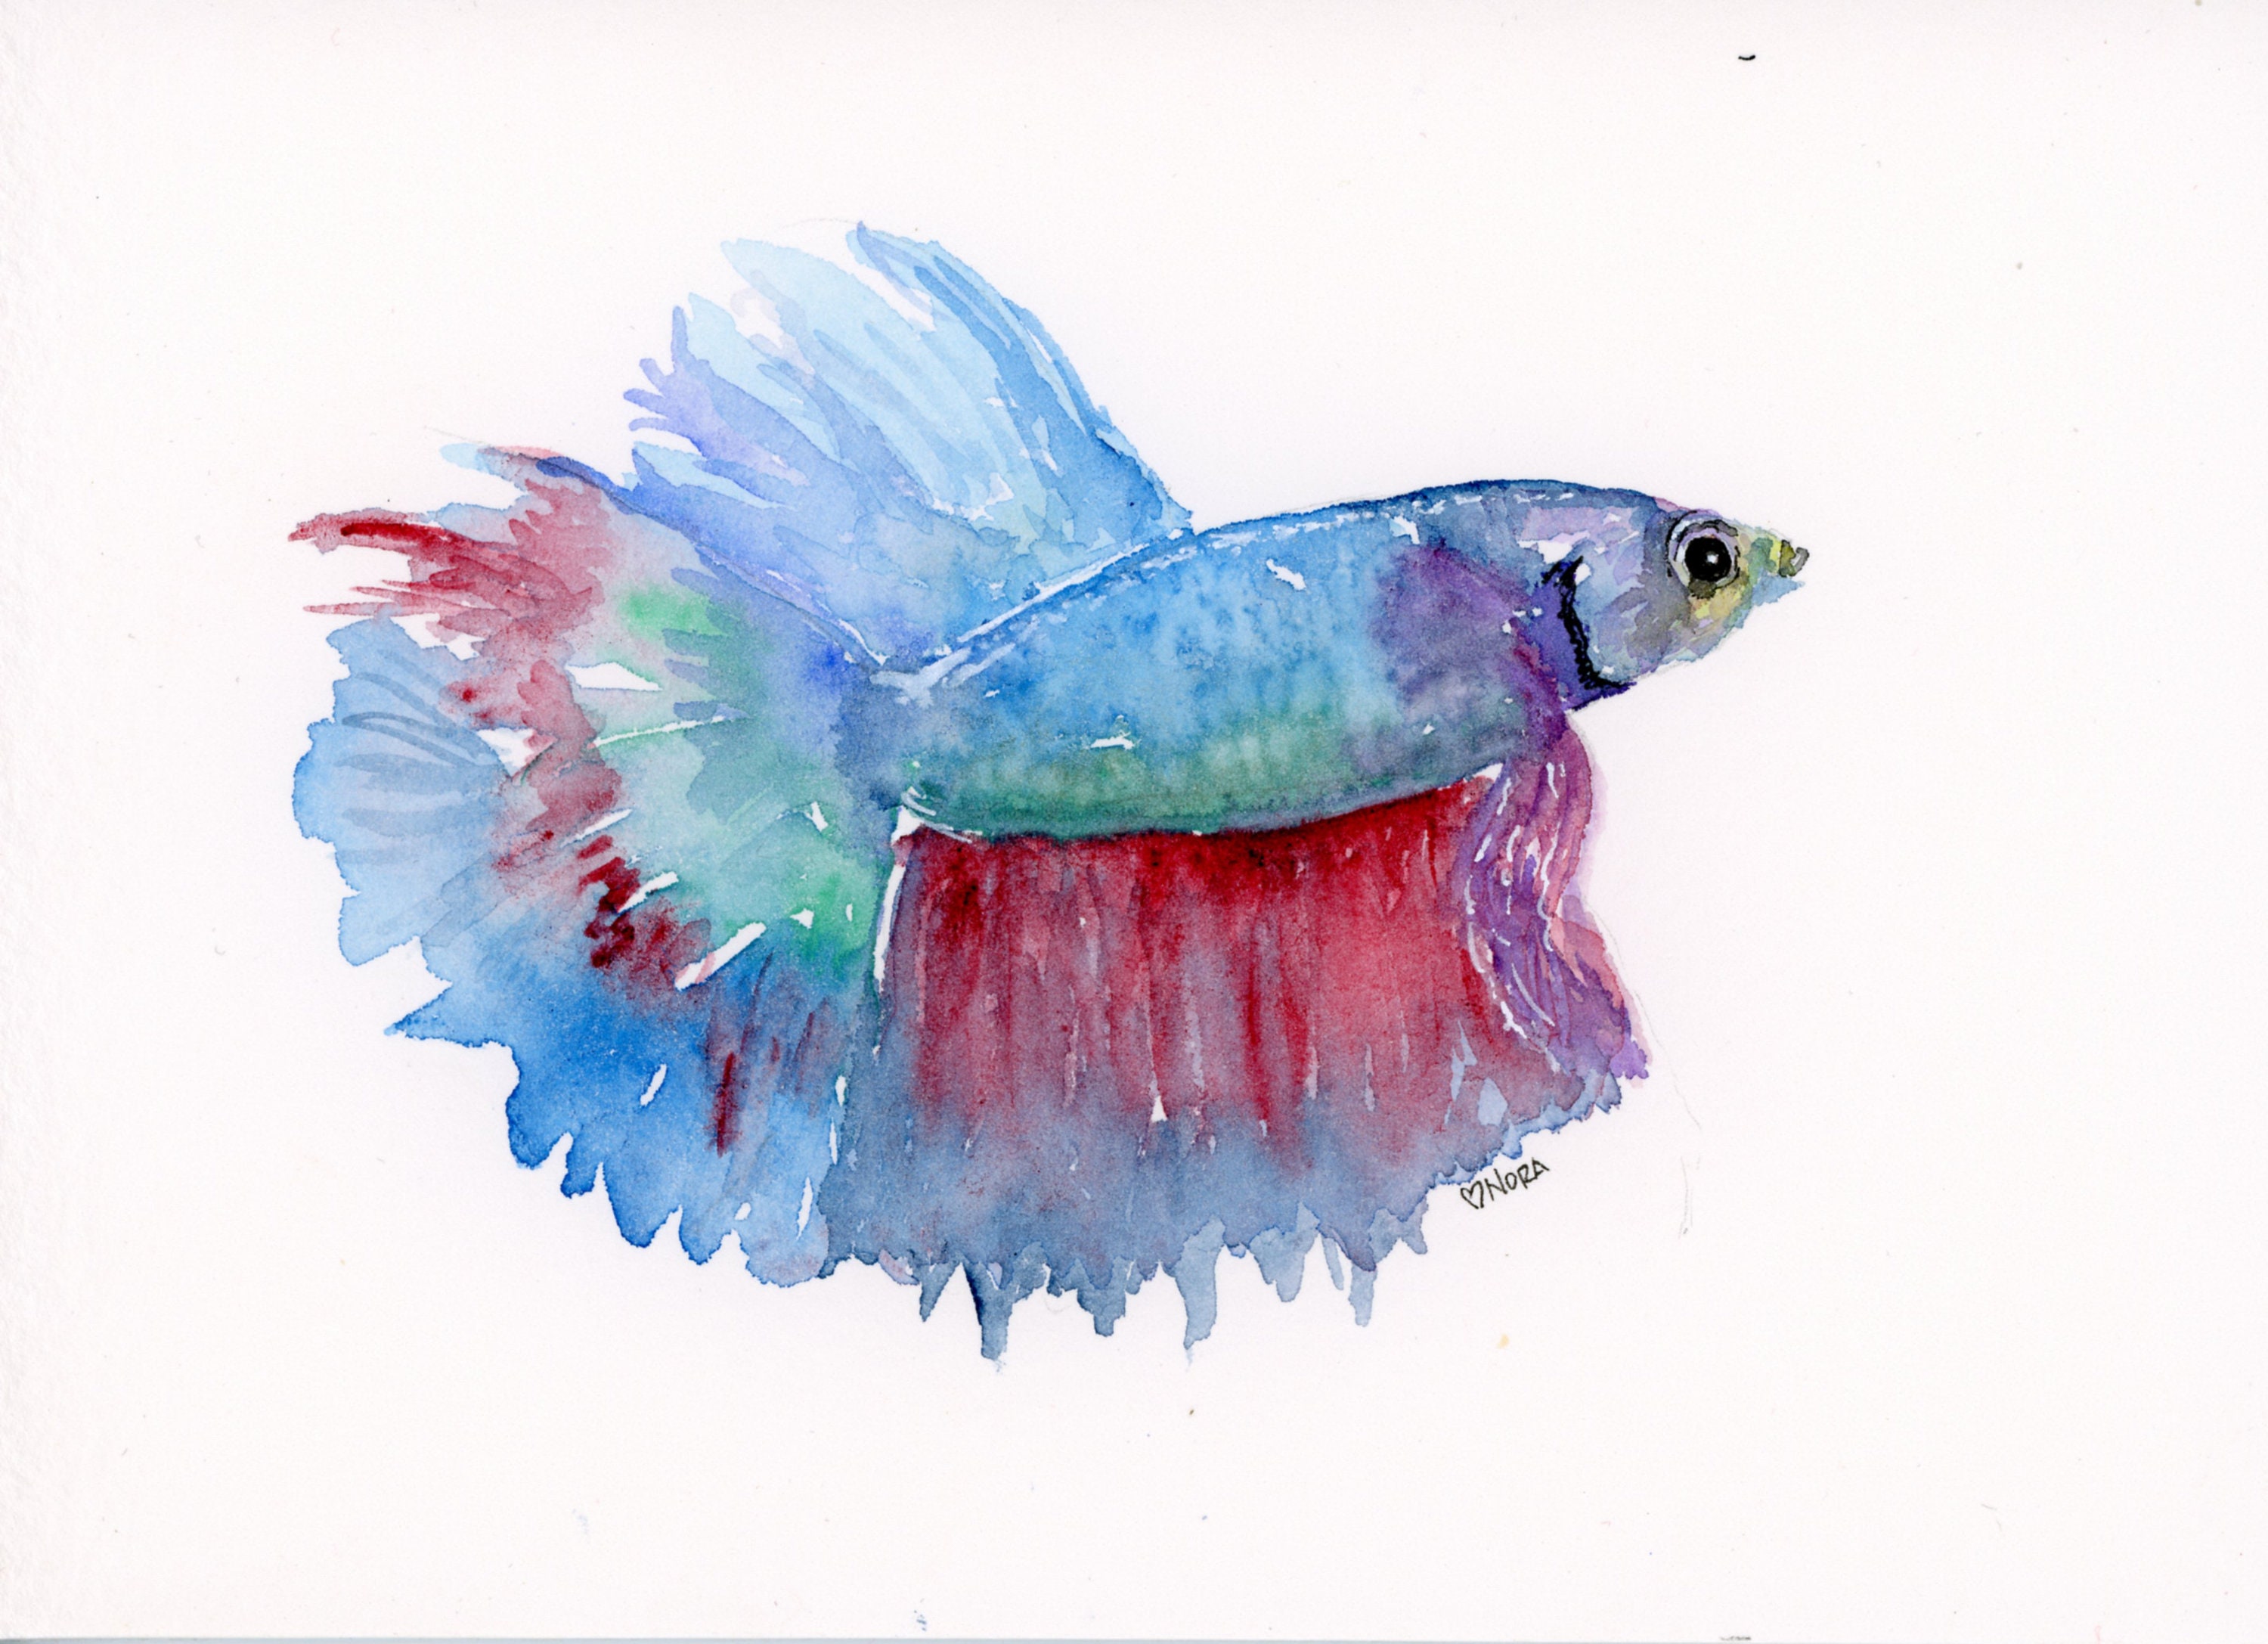 A little betta fish from my book „Shiny Watercolors“ @emf_verlag drawn